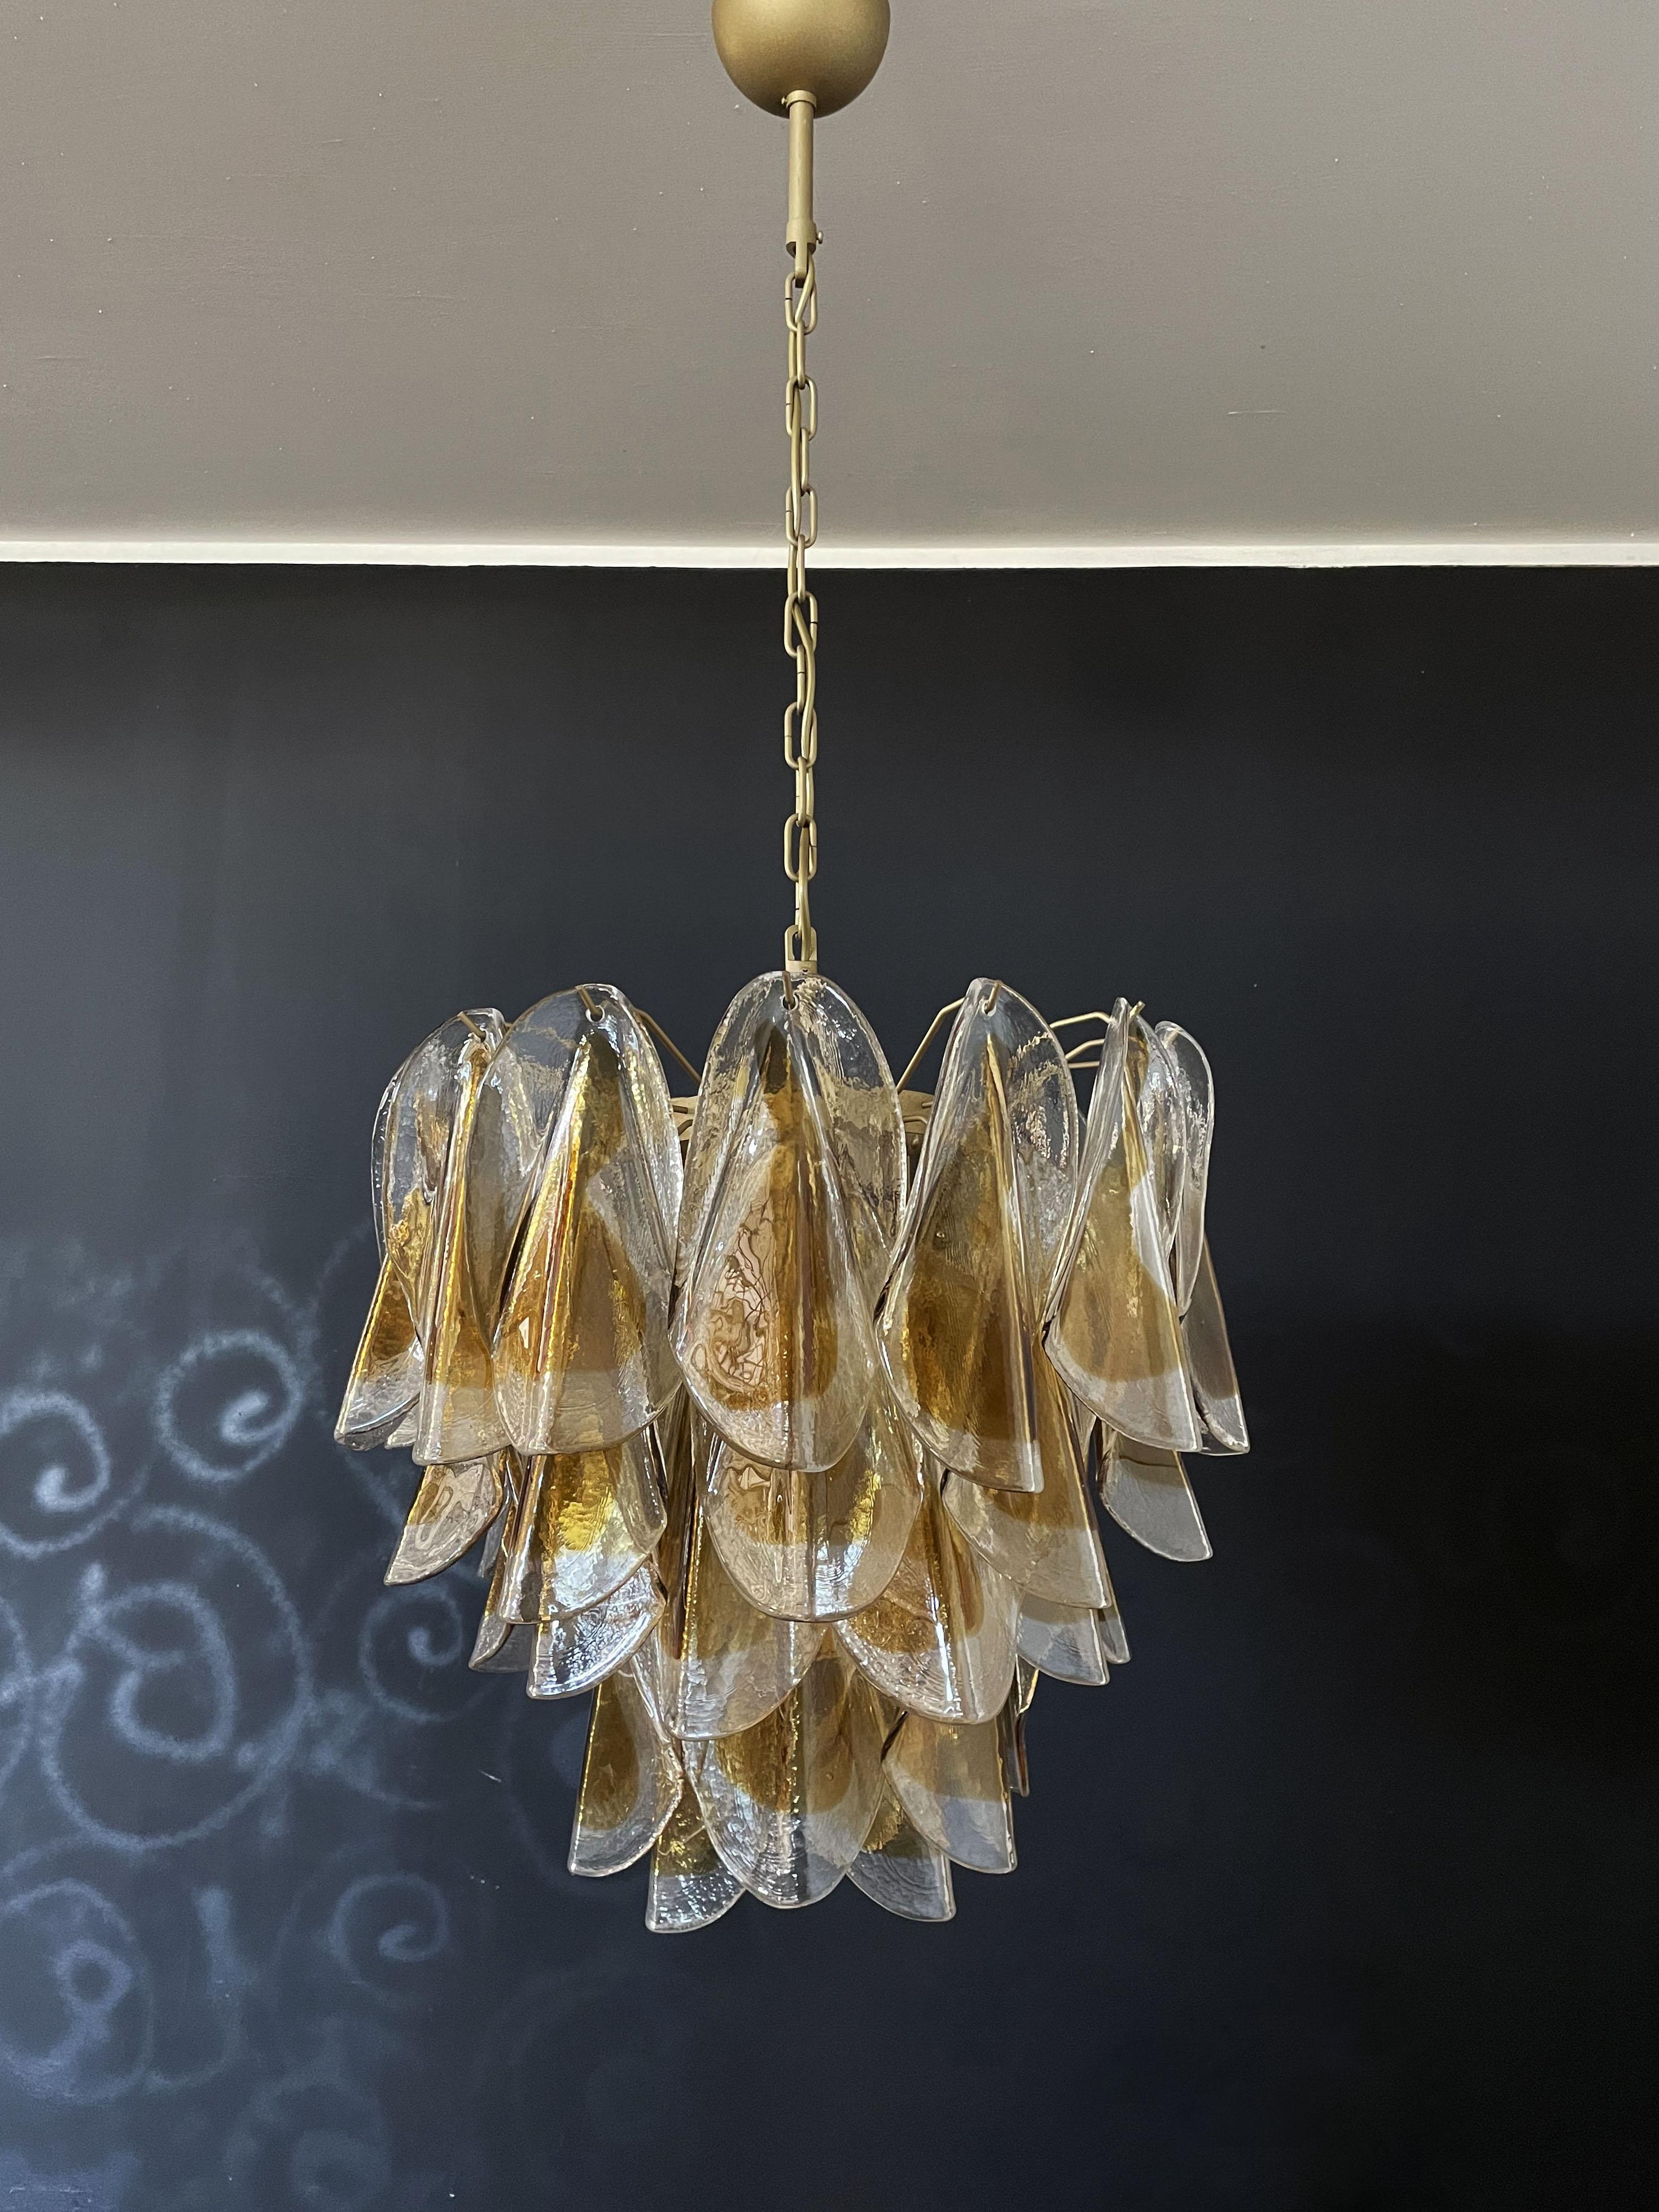 Rare Italian vintage Murano chandelier. The fixture is made up of 41 individual handblown glass elements hanging (transparent and amber) from a gold painted metal frame. Each piece clear with amber centre.
Period: late XX century
Dimensions: 47,25